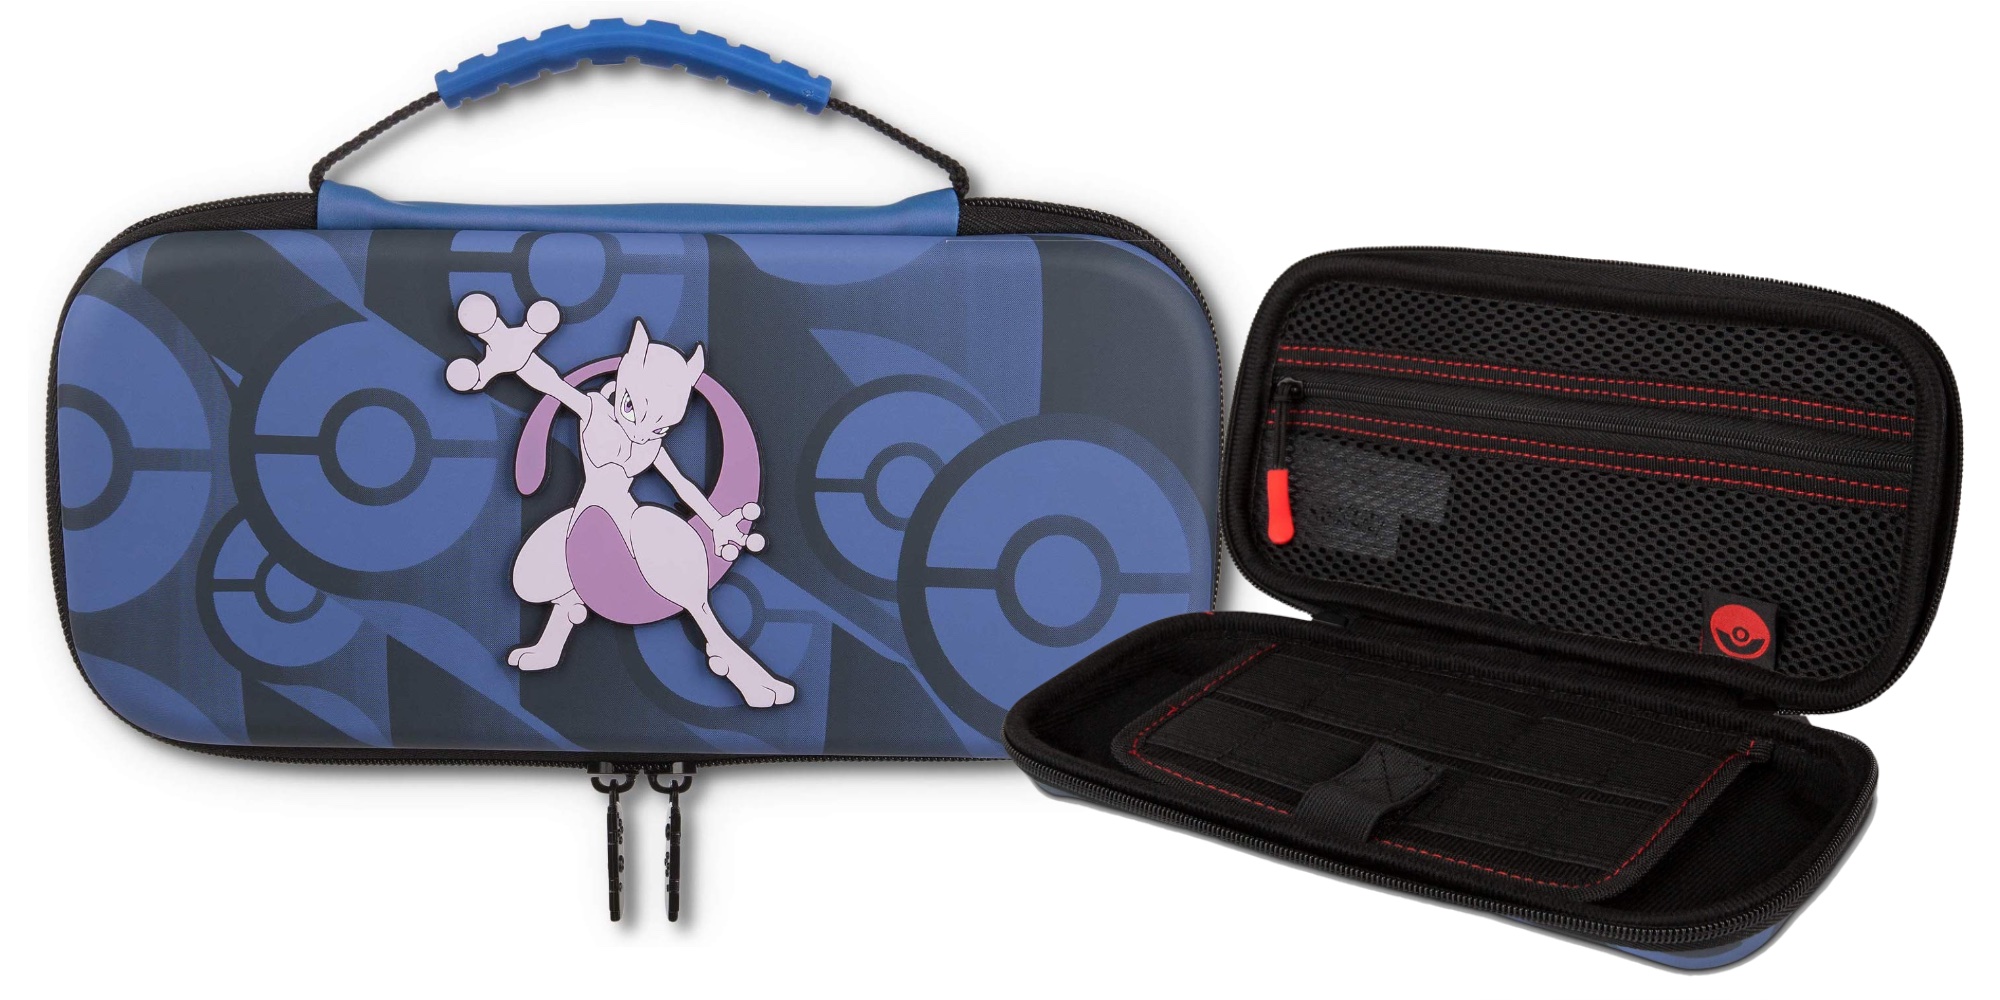 PowerA Mewtwo Switch Case protects your 